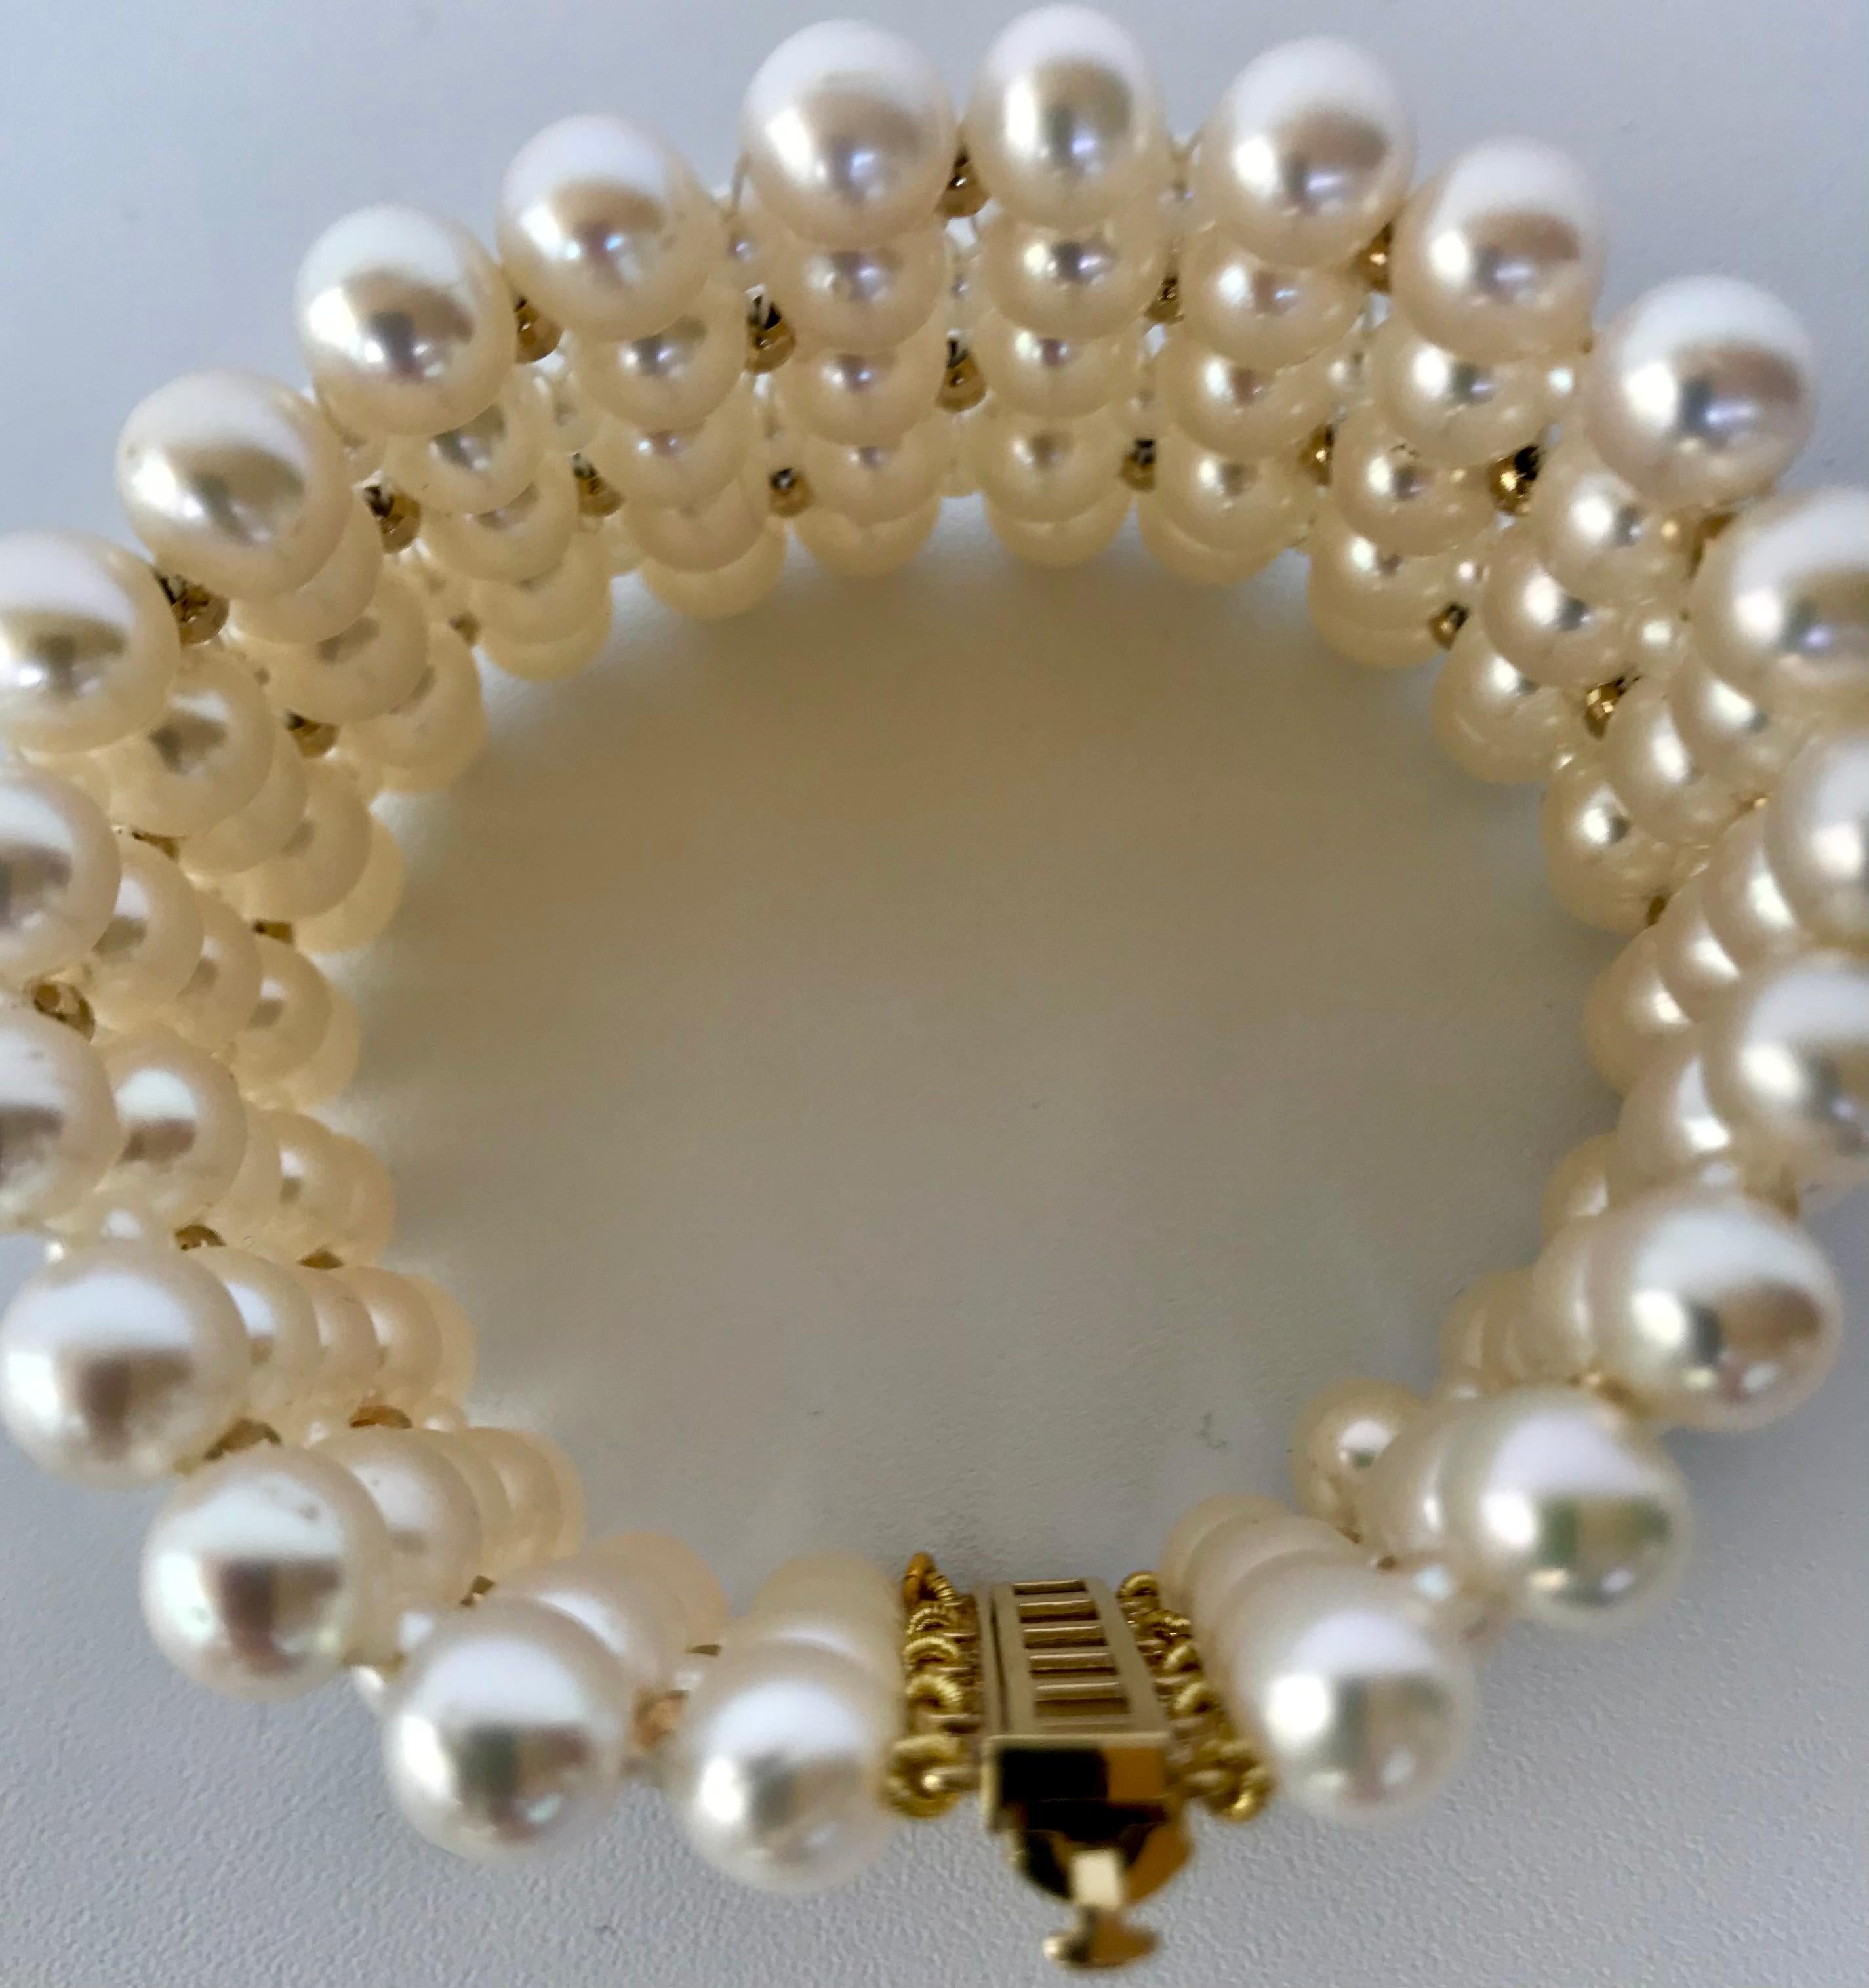 Artisan Marina J Stunning Woven Pearl Bracelet with 14 Karat Yellow Gold Beads and Clasp For Sale